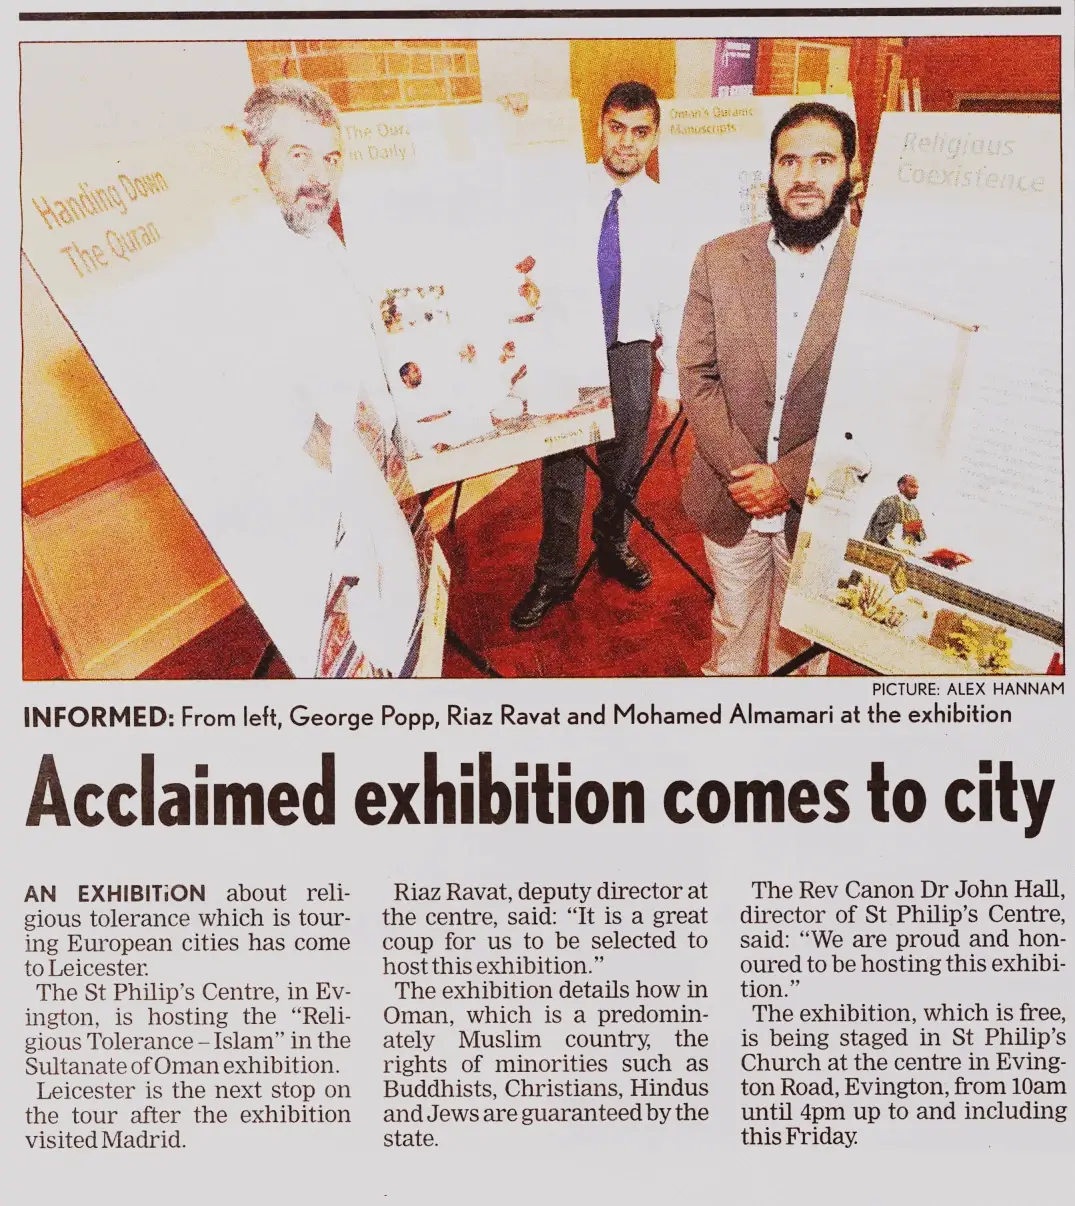 Article about the Exhibitions in the UK - 2012